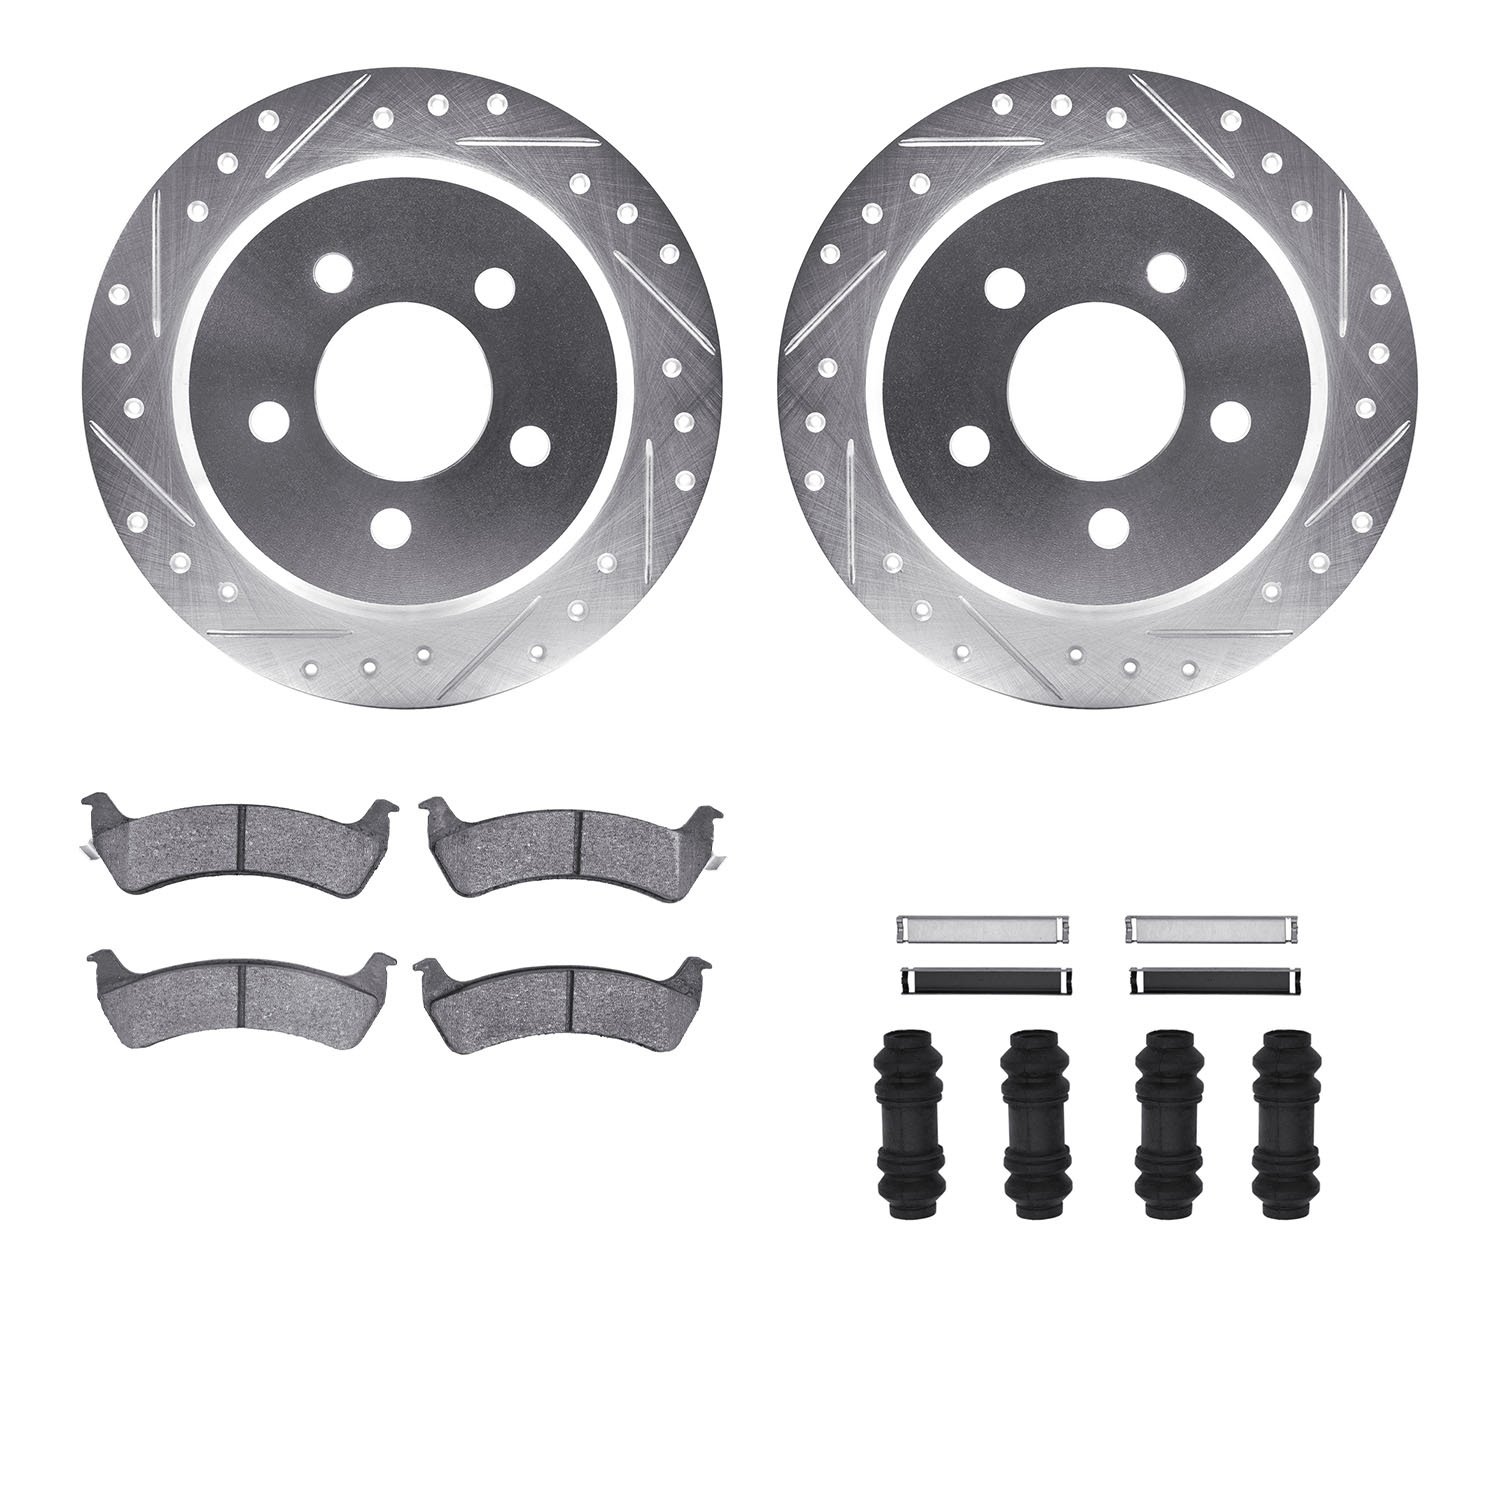 Drilled/Slotted Brake Rotor with 3000-Series CeMoparic Brake Pads